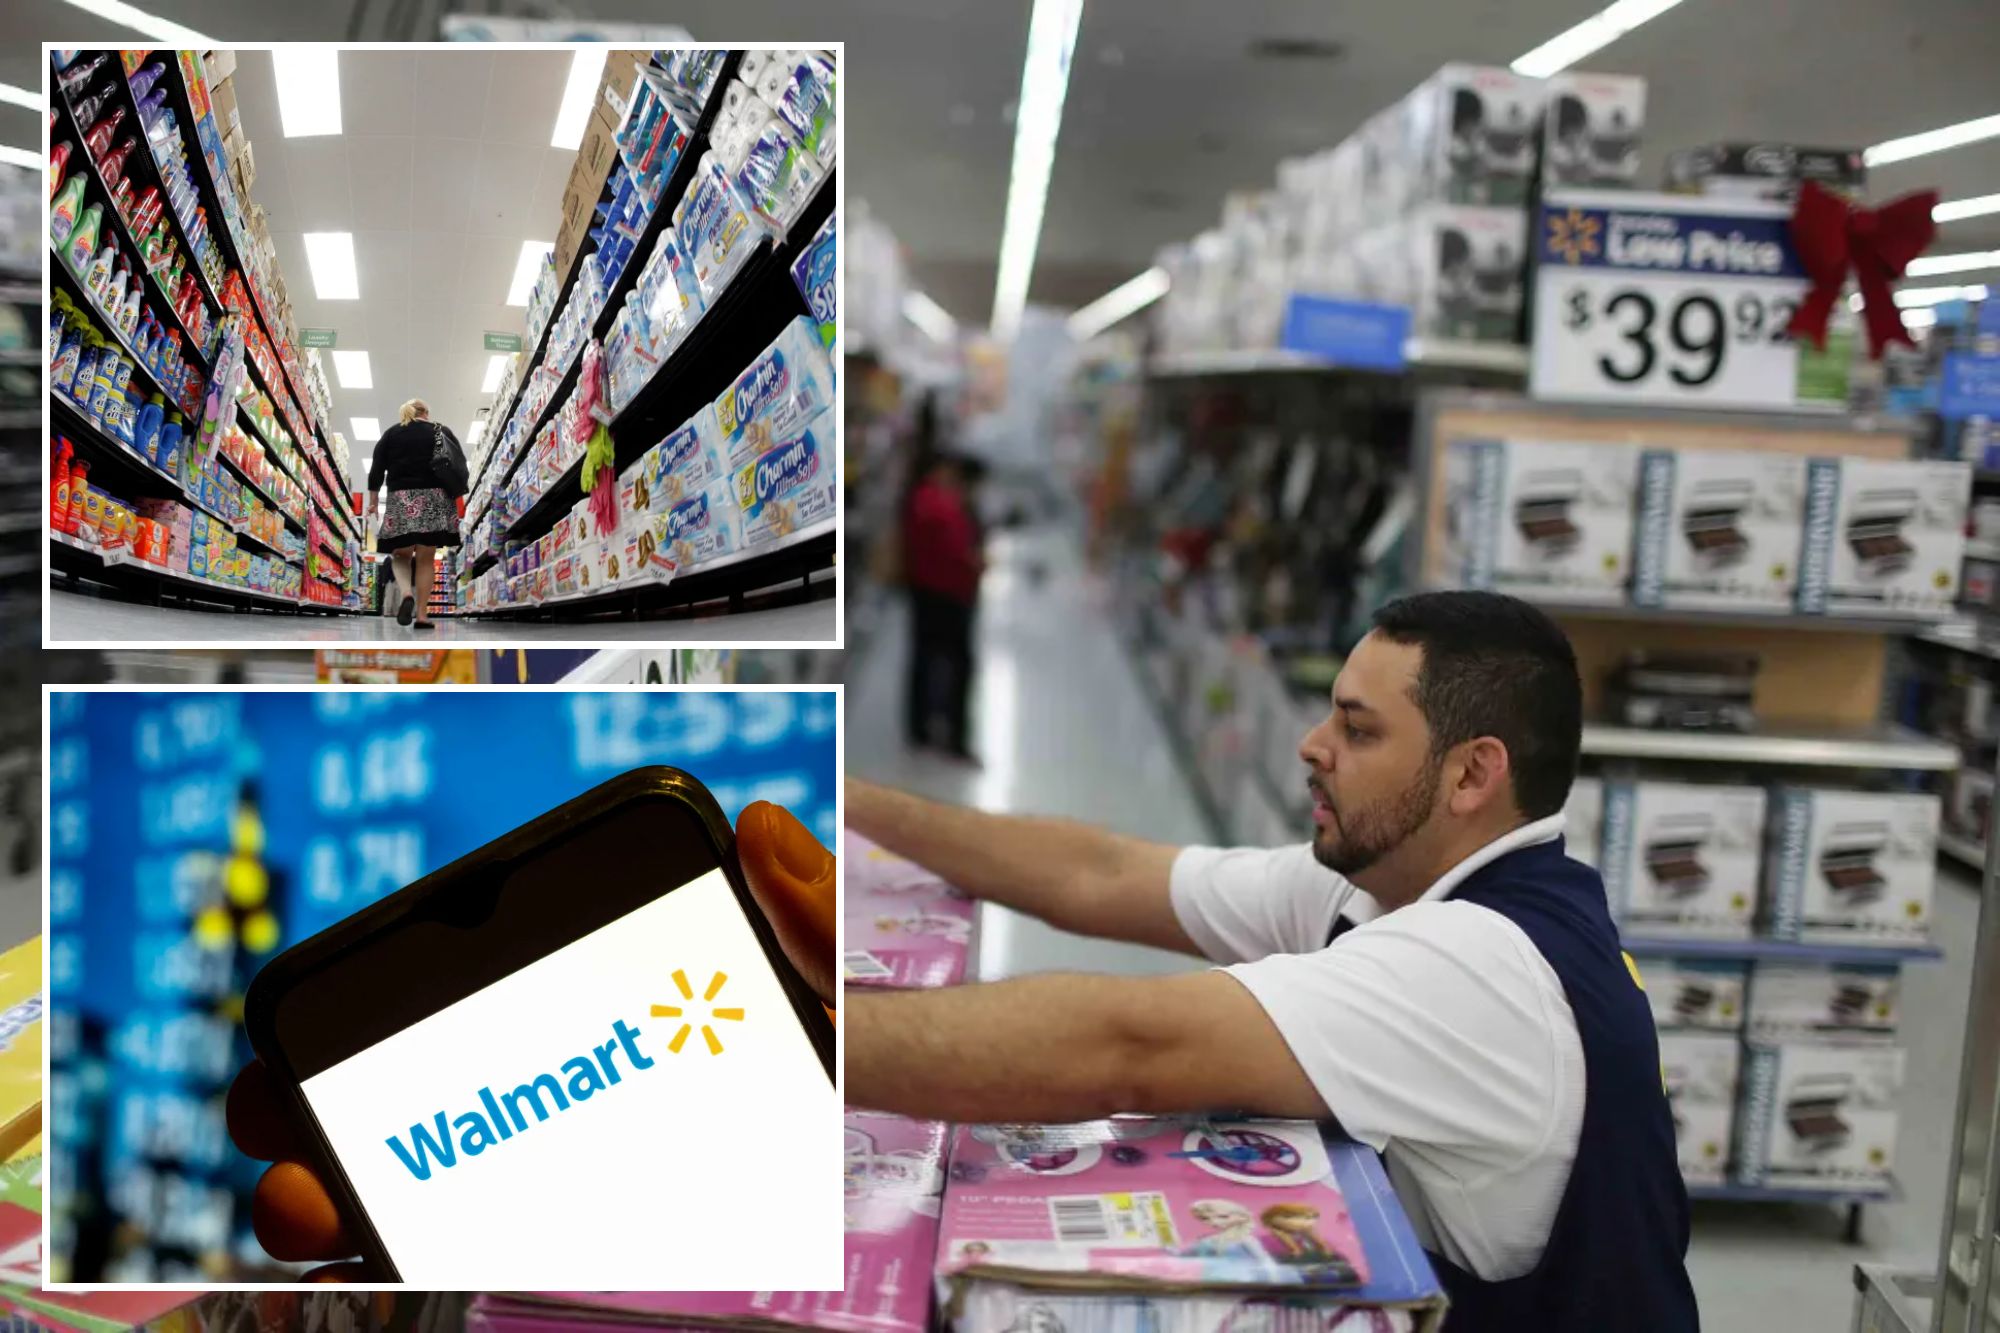 These are some savvy tips from a Walmart employee to better your shopping experience.